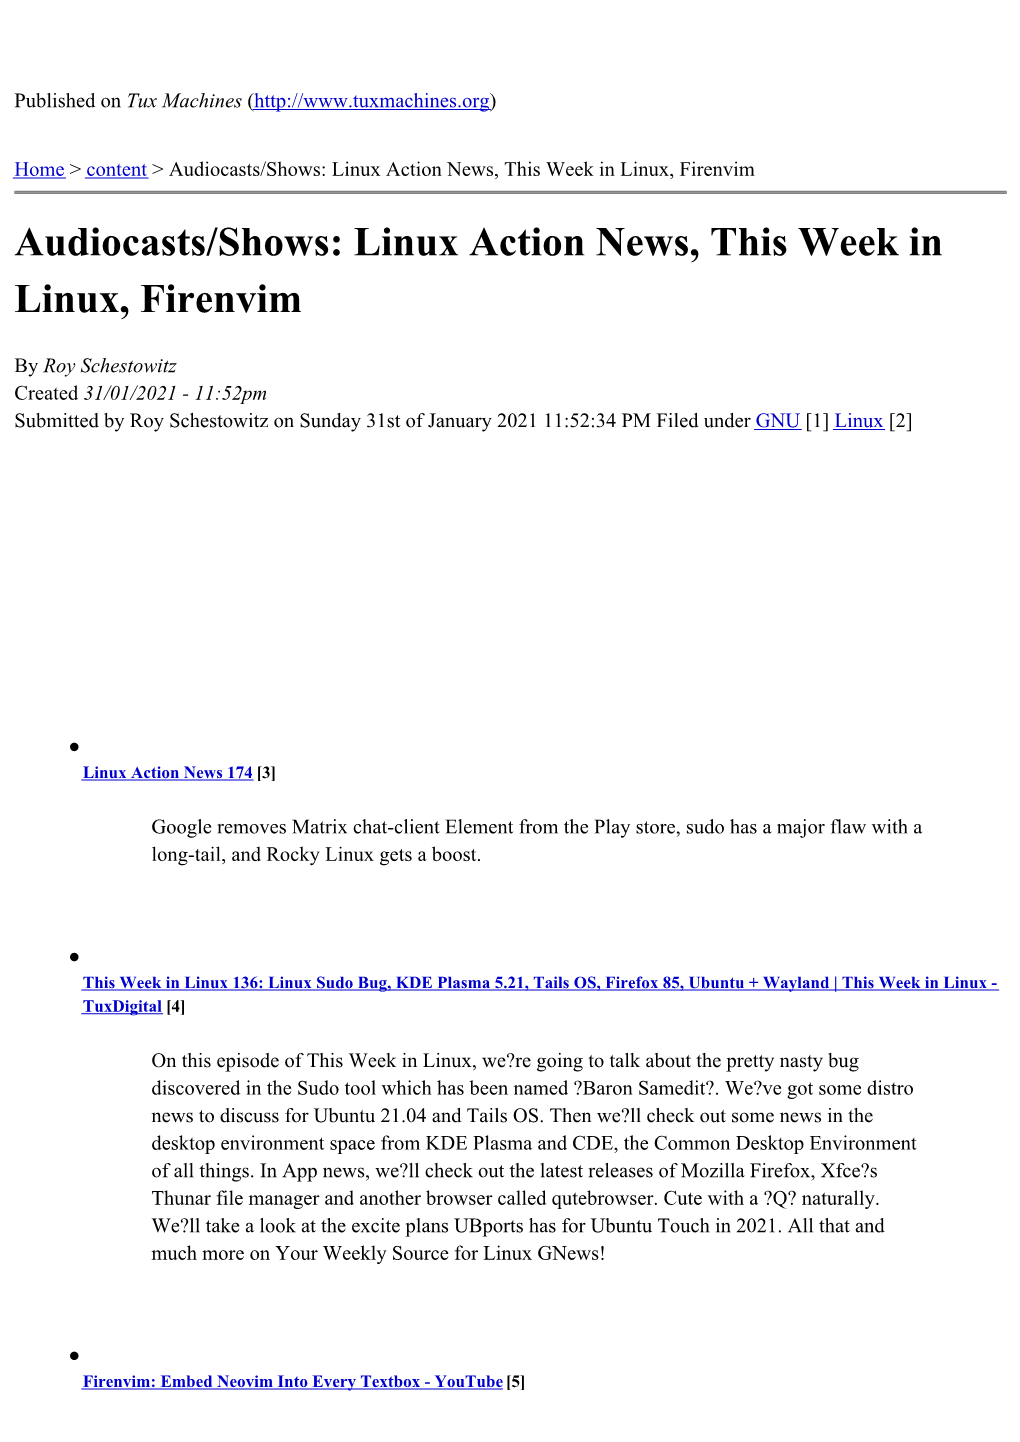 Audiocasts/Shows: Linux Action News, This Week in Linux, Firenvim